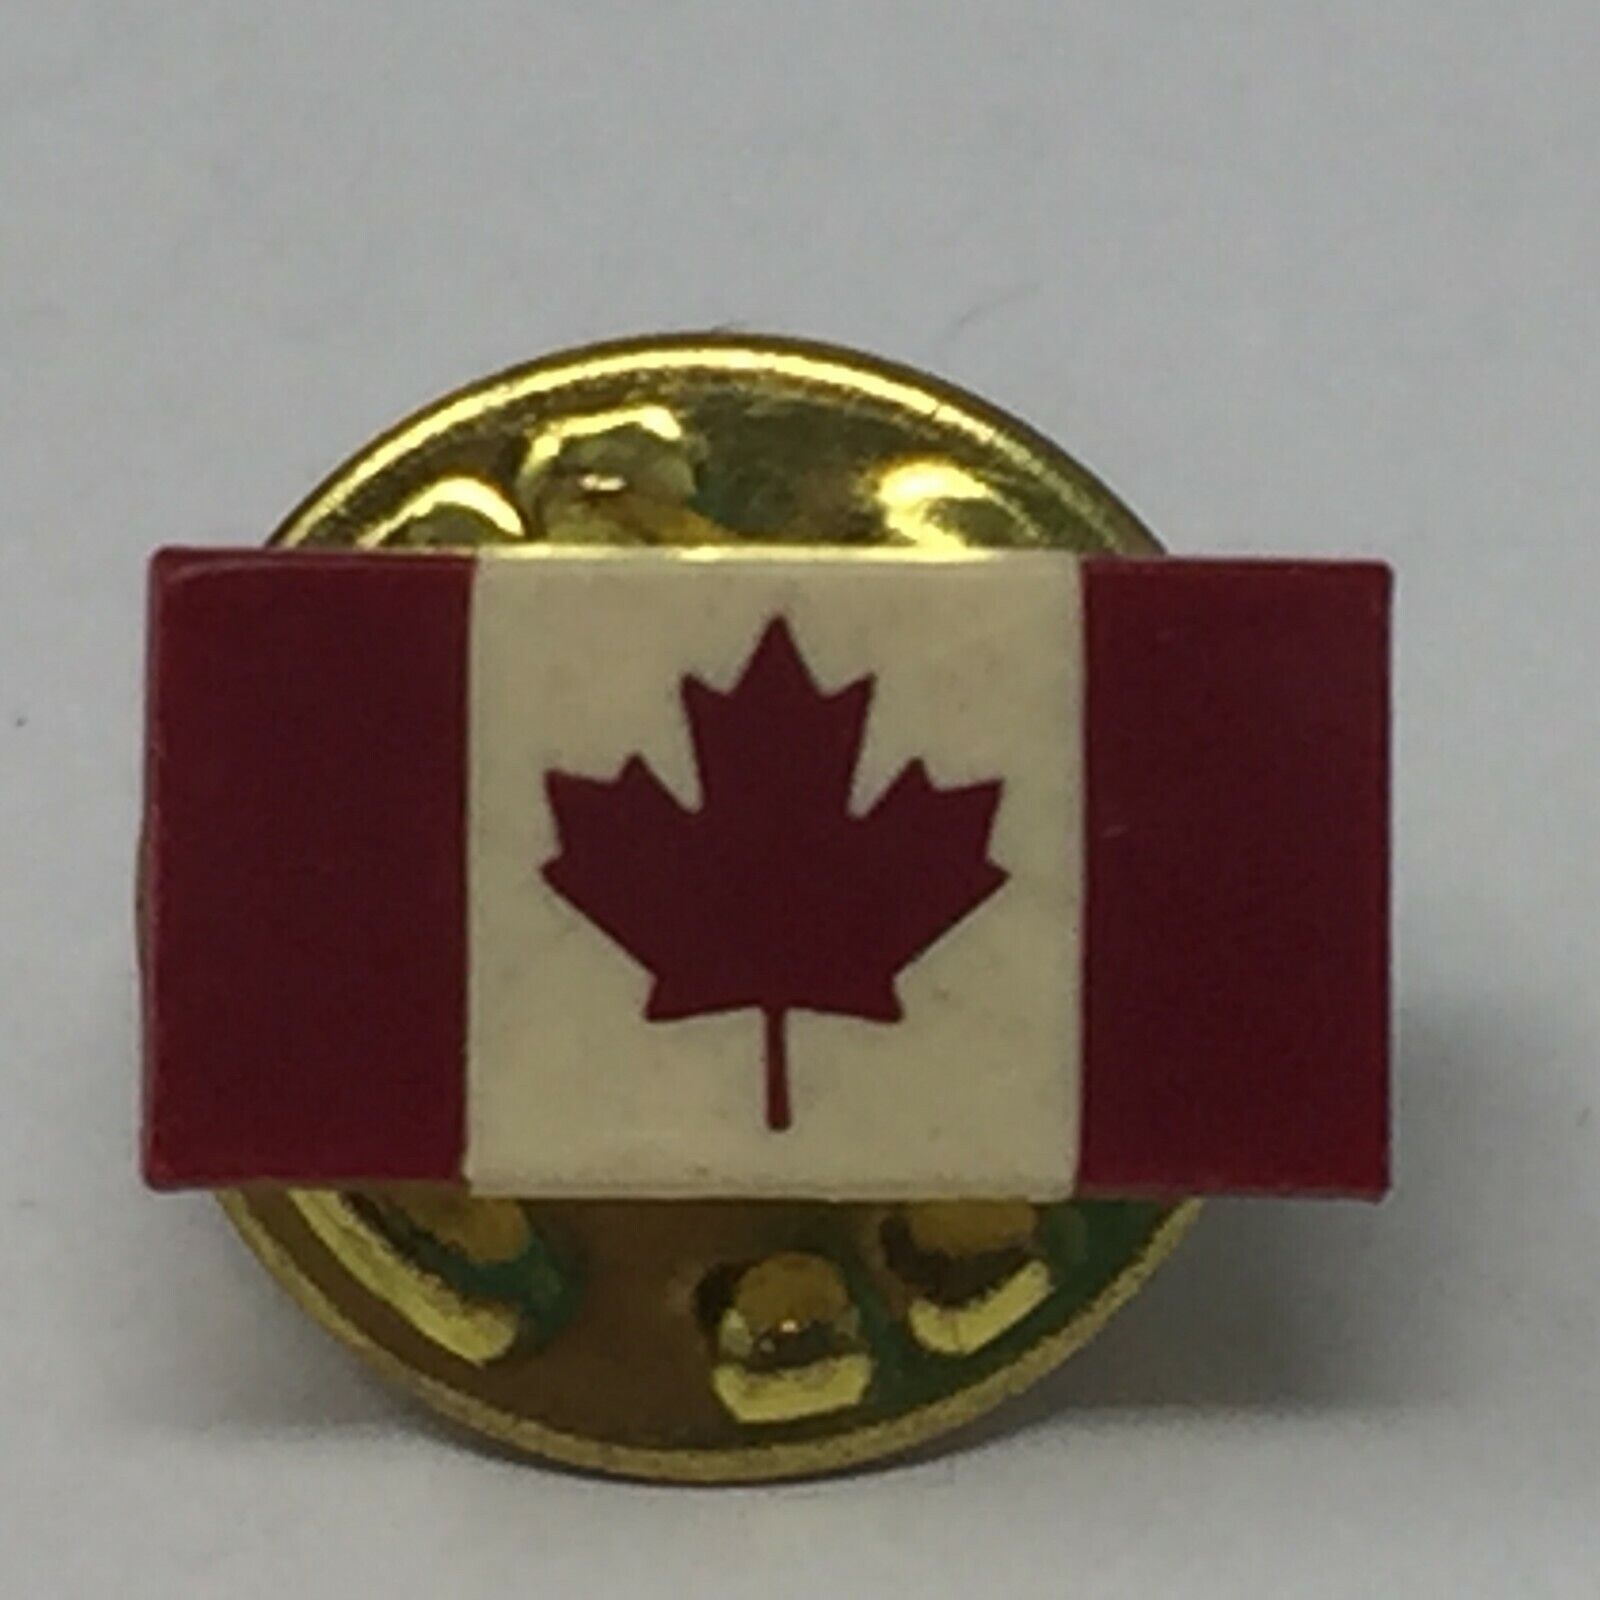 Canadian Flag Pin Maple Leaf Lapel Pinback Small Vintage Canada 12.5 mm X 6.5 mm